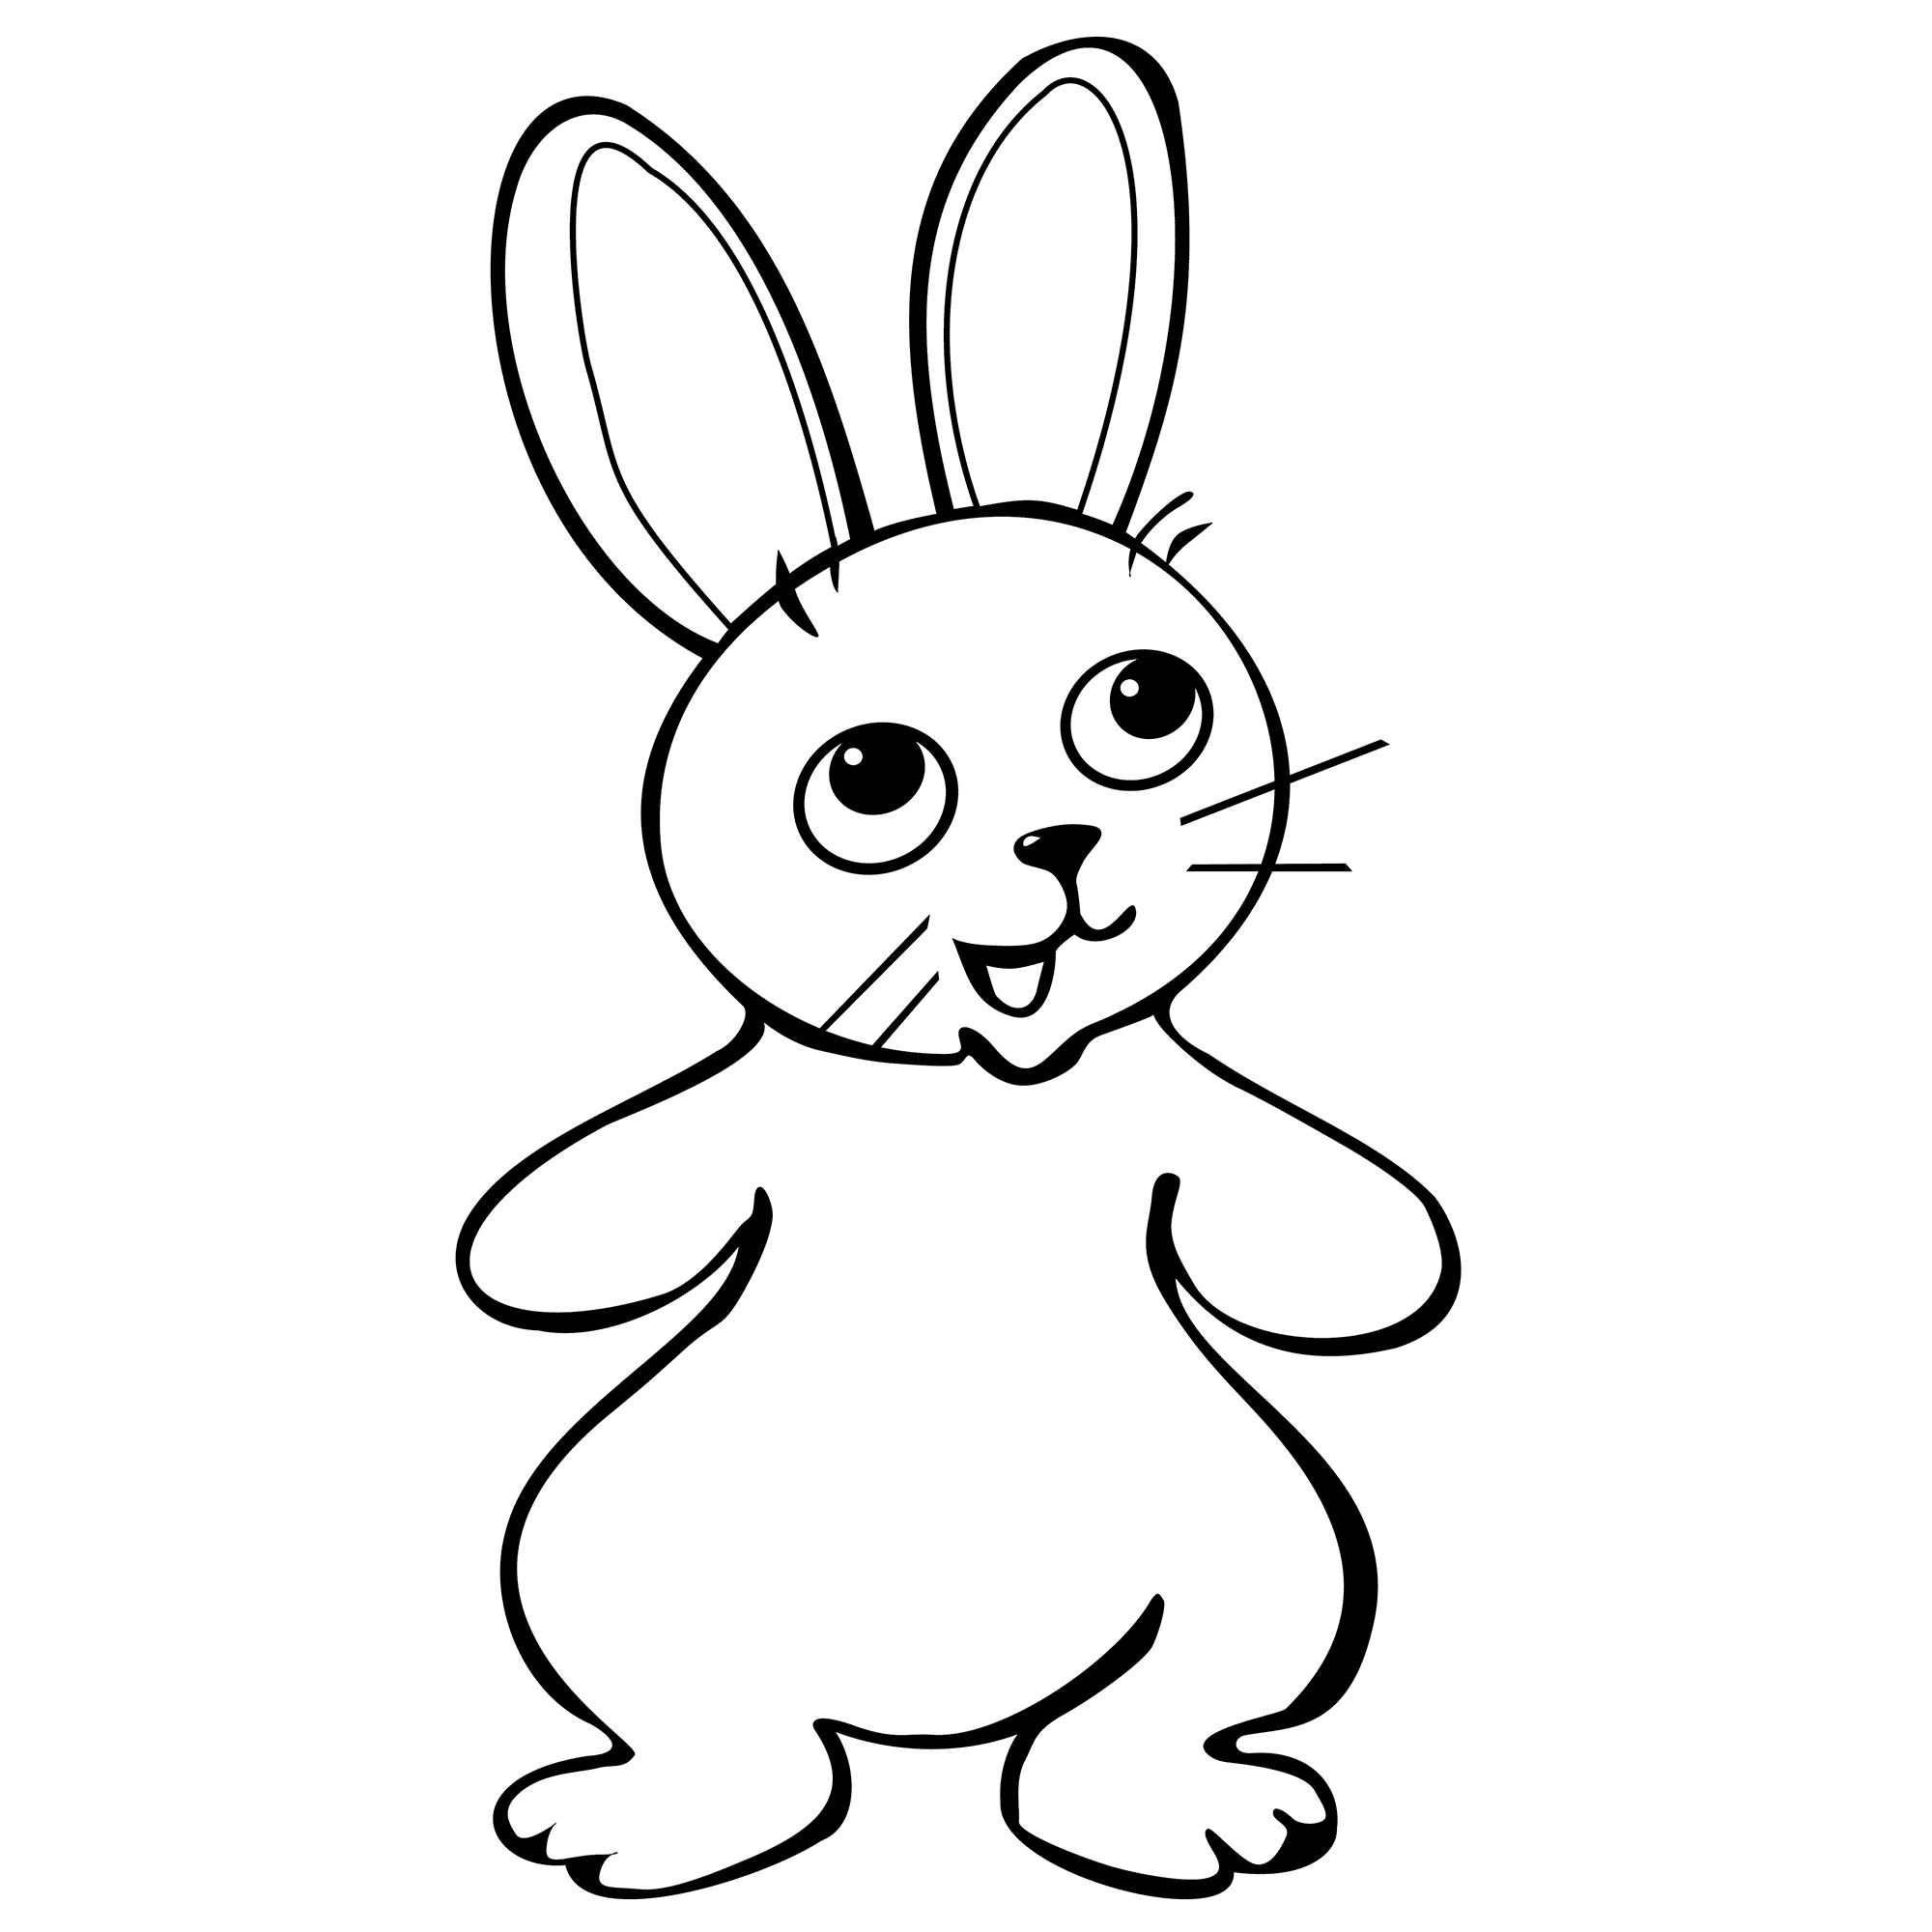 Coloring Rabbit Pages : Easter Bunny Coloring Pages Coloring Rocks